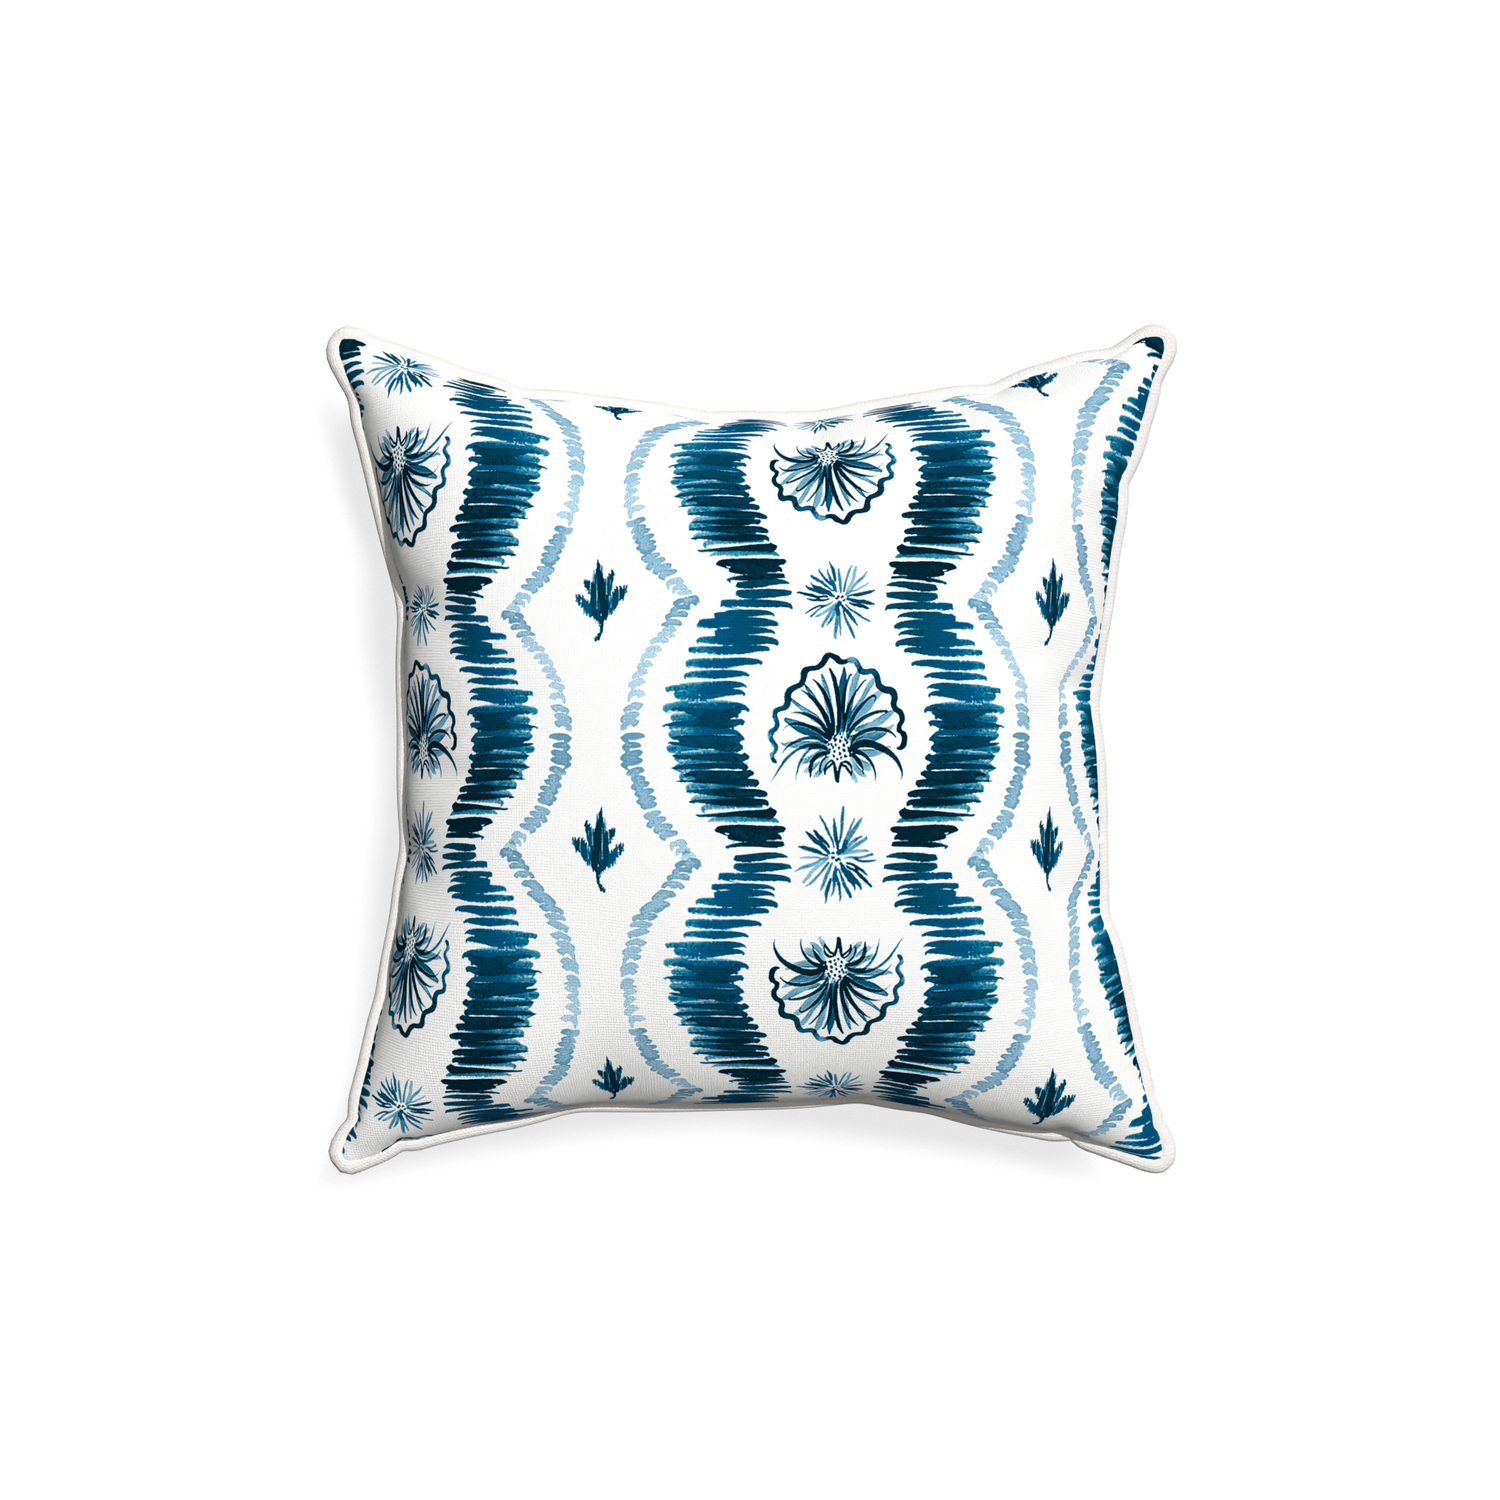 18-square alice custom blue ikatpillow with snow piping on white background